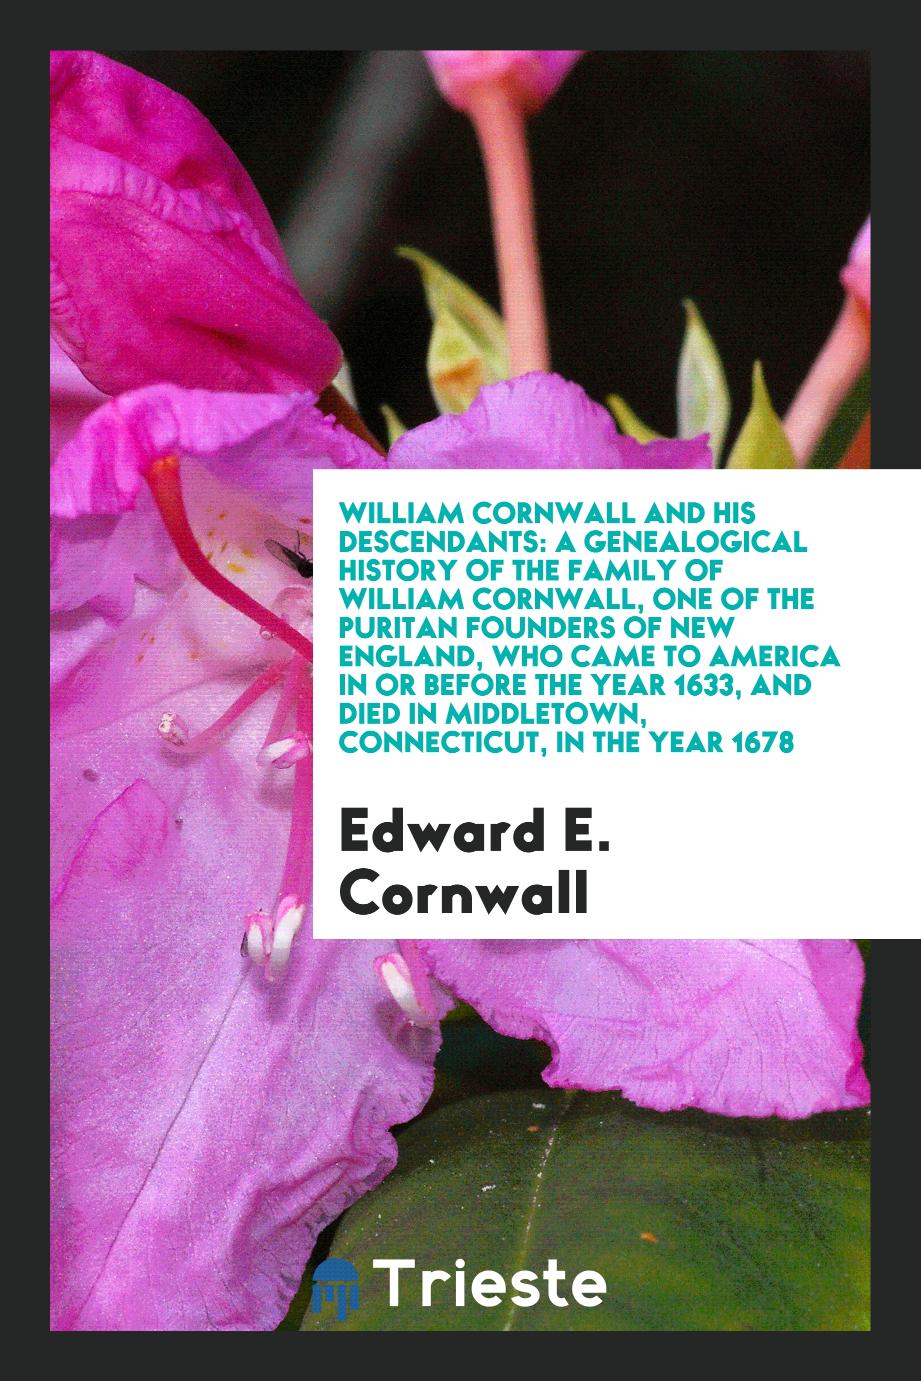 William Cornwall and his descendants: a genealogical history of the family of William Cornwall, one of the Puritan founders of New England, who came to America in or before the year 1633, and died in Middletown, Connecticut, in the year 1678